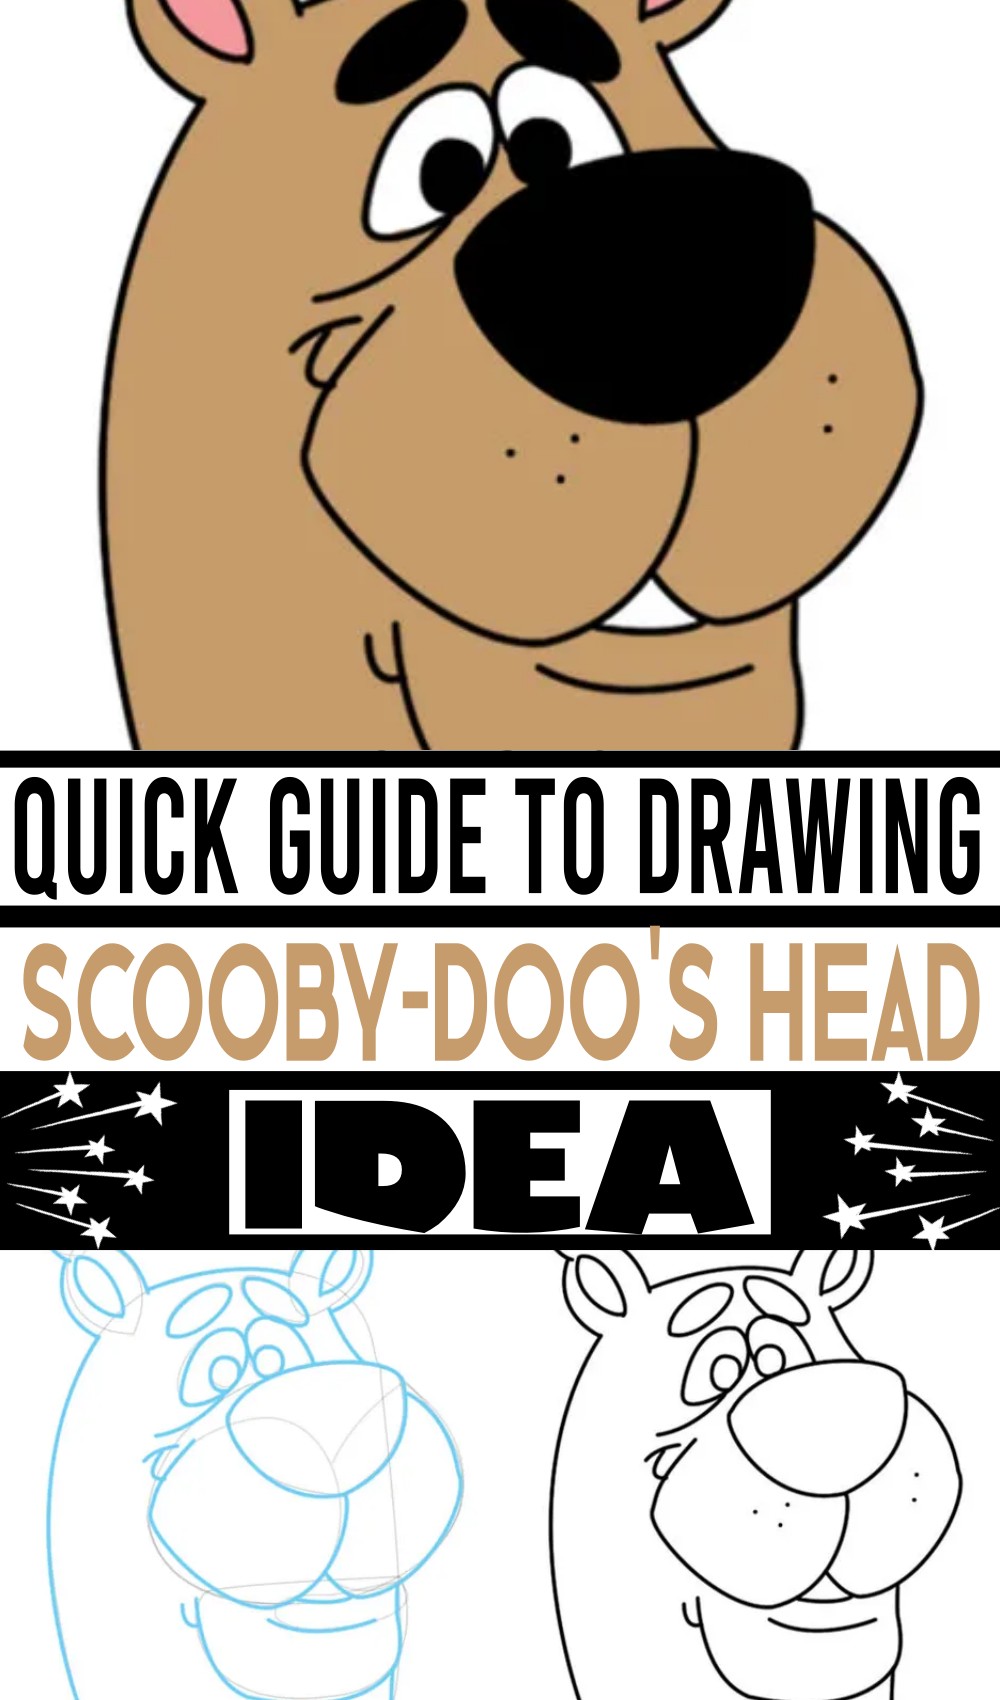 Quick Guide To Drawing Scooby-doo's Head